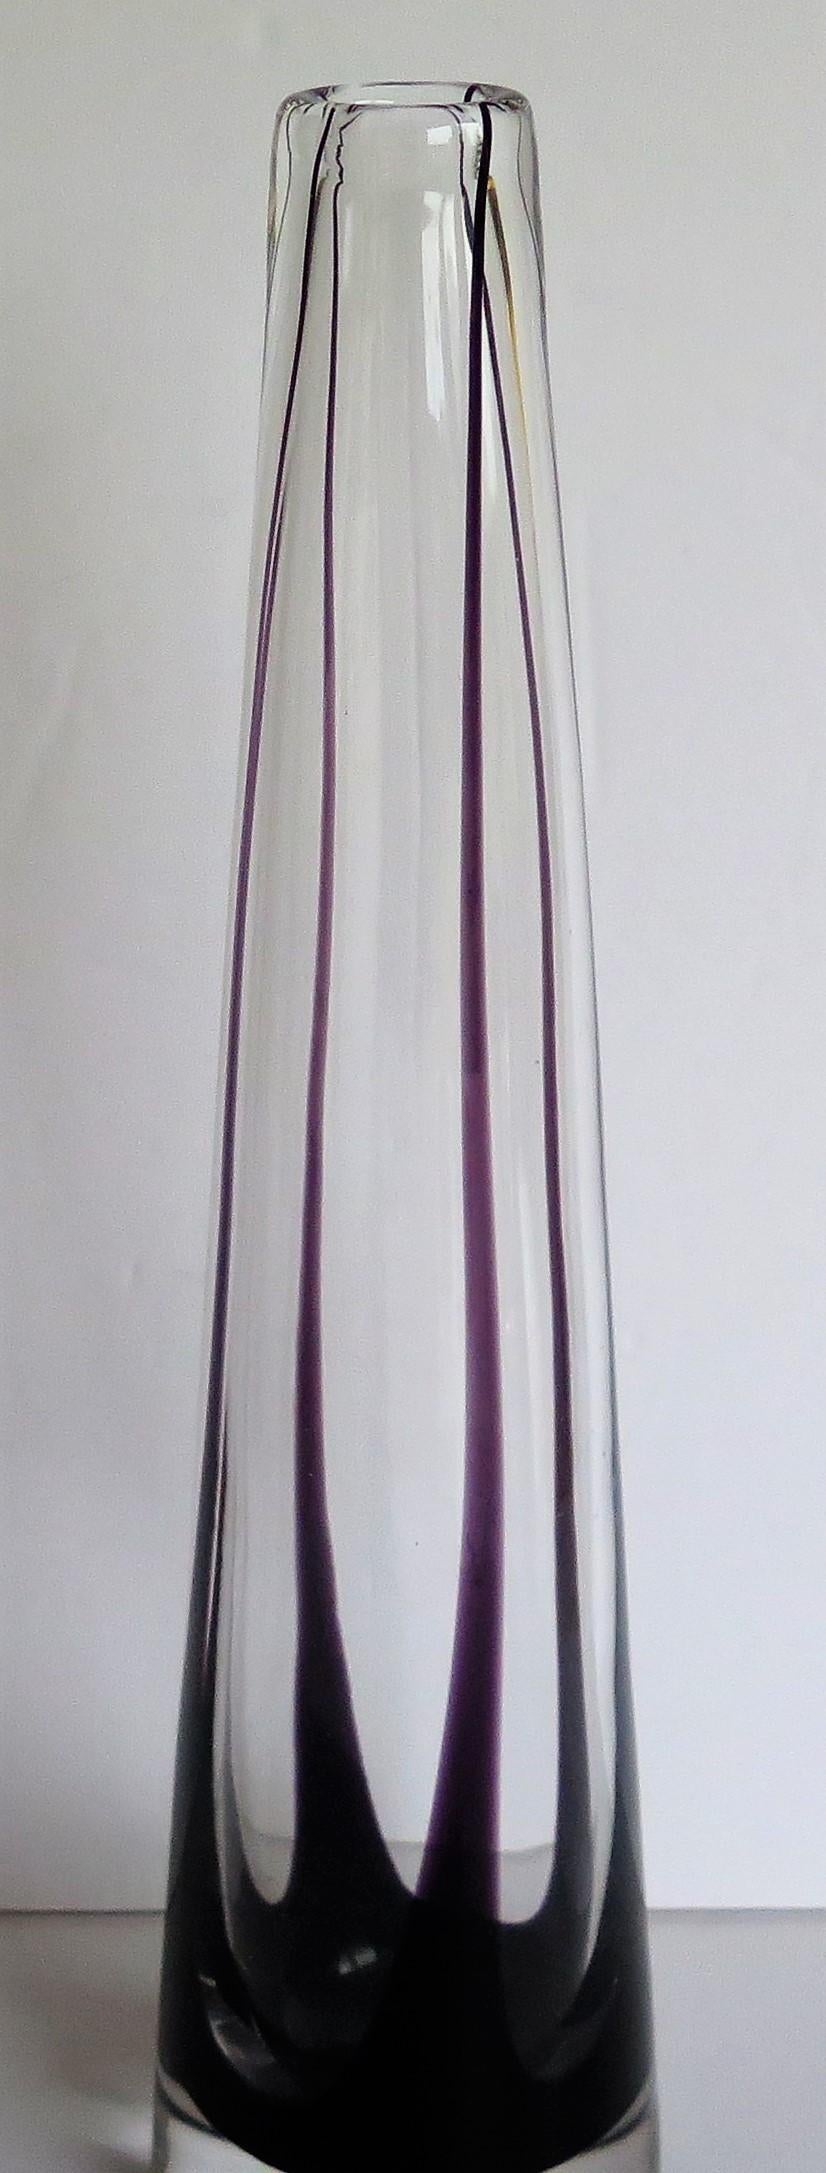 Swedish Tall Glass Sommerso Vase by Vicke Lindstrand for Kosta Glass, Sweden Circa 1960 For Sale